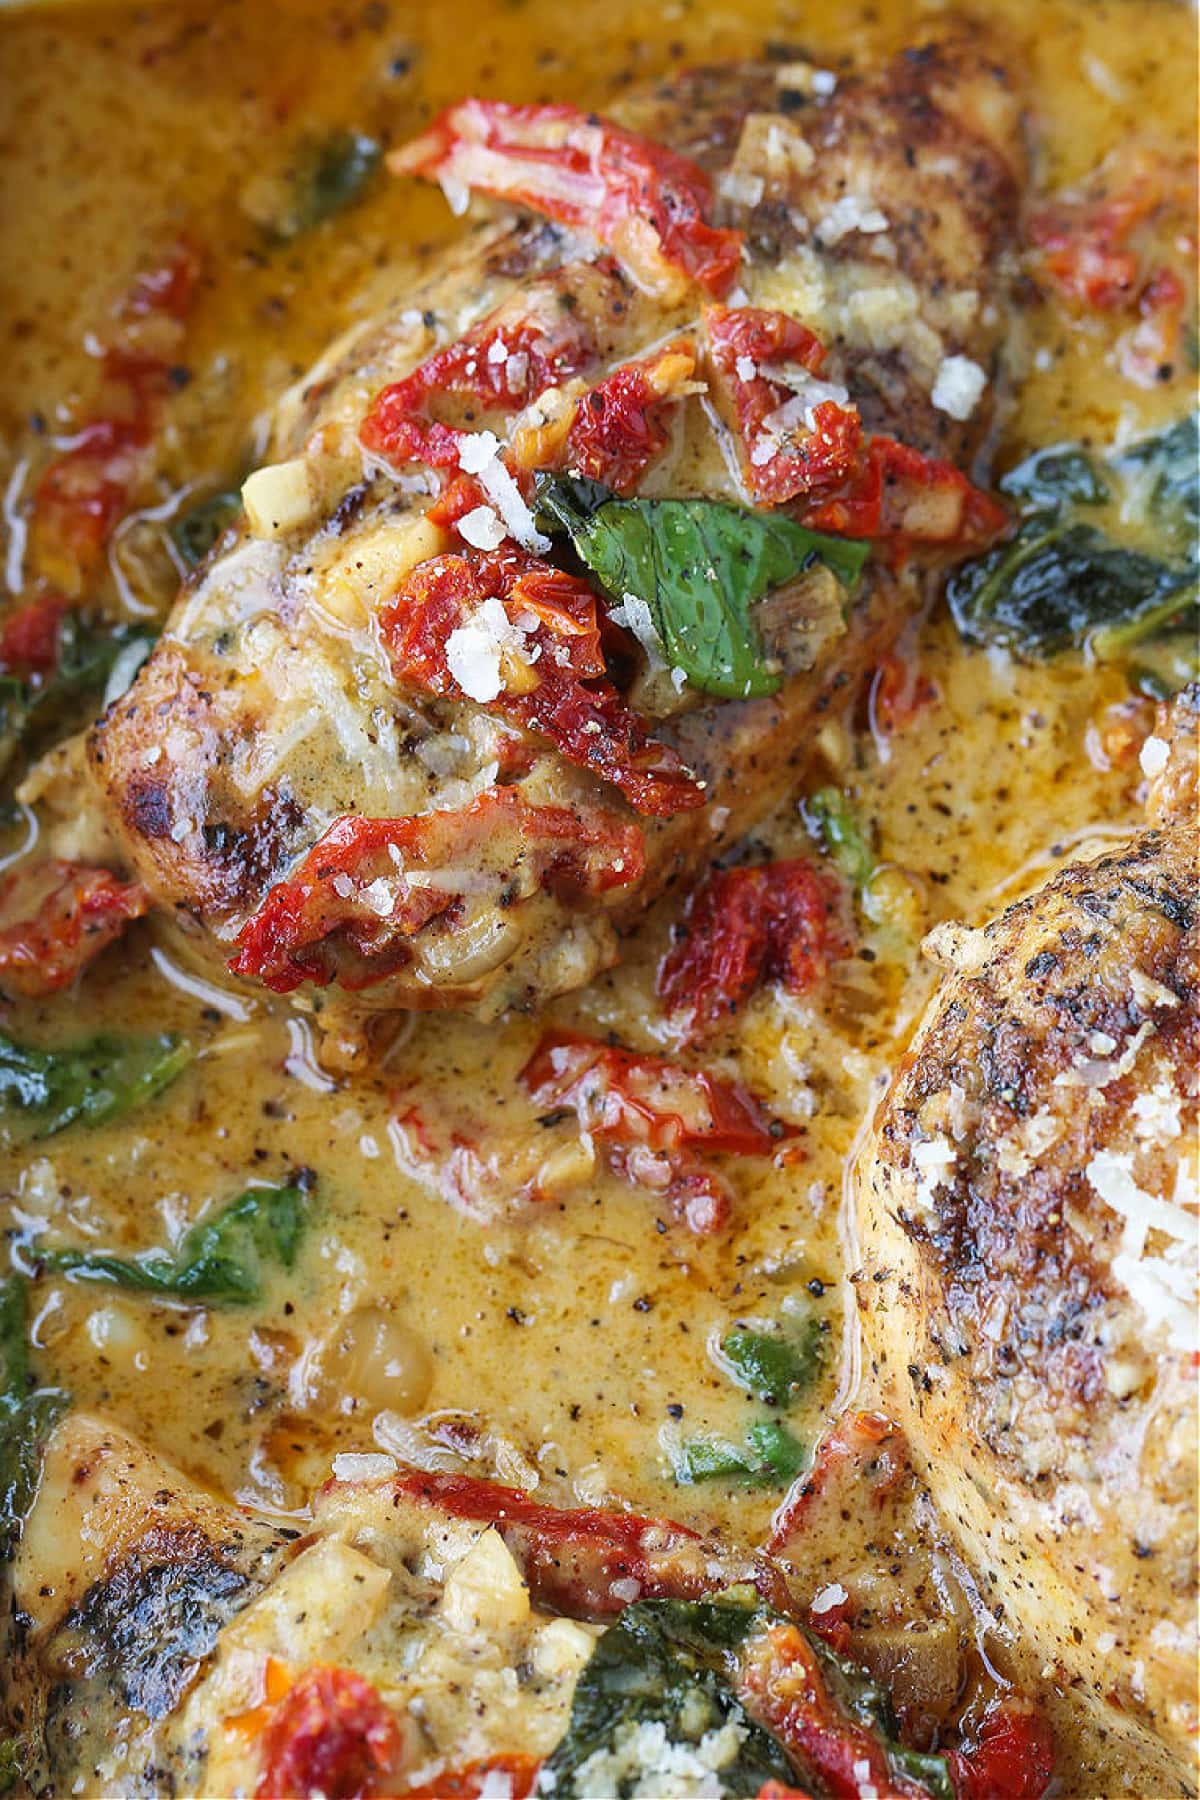 chicken breasts in a white wine cream sauce with sun dried tomatoes and spinach